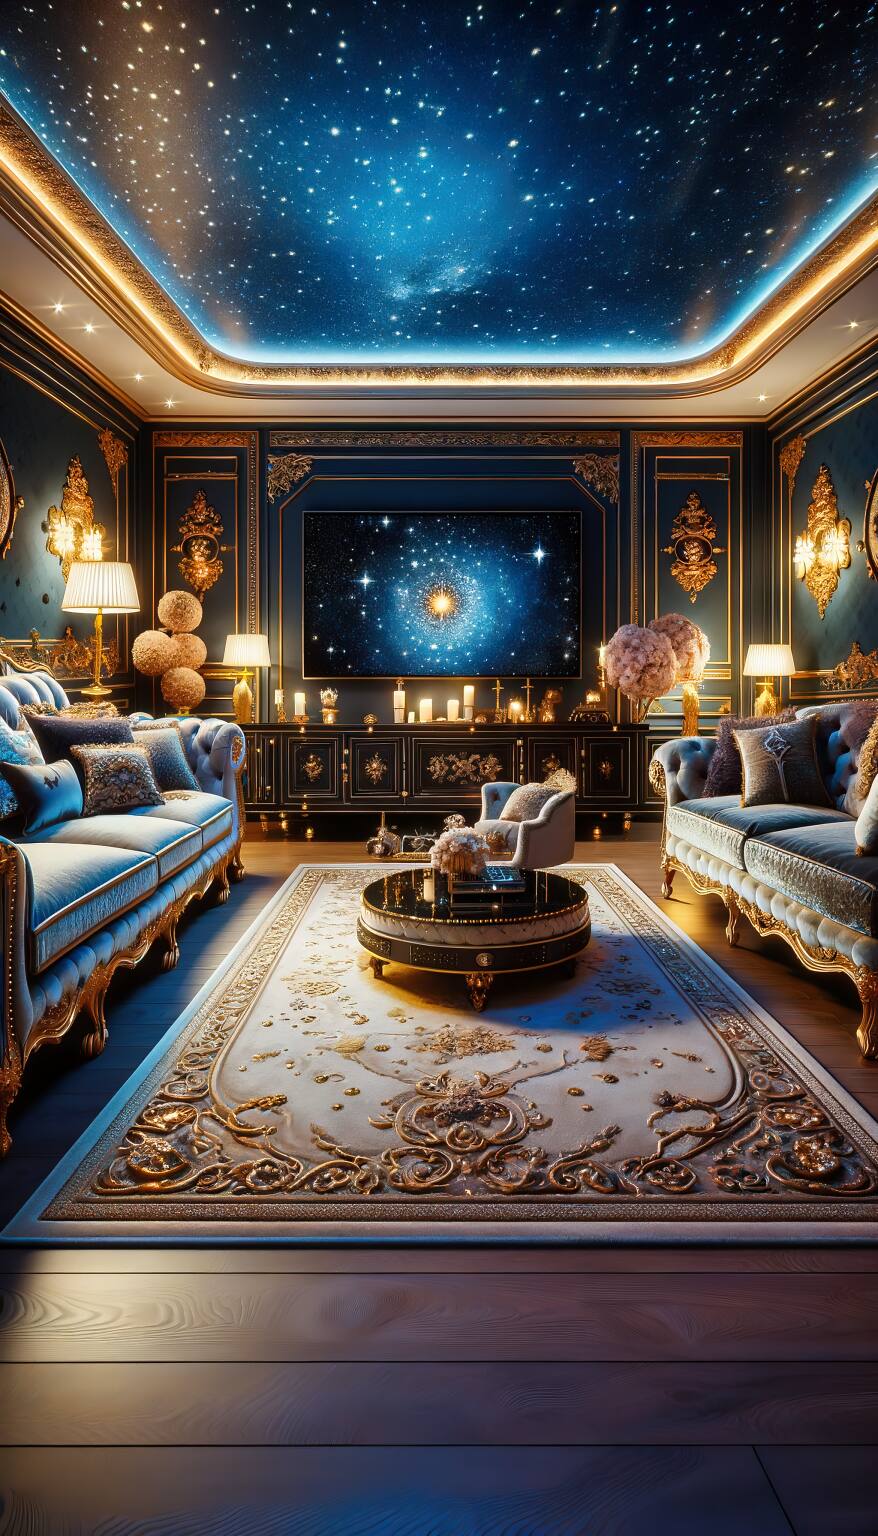 A Luxurious Romantic Living Room In Midnight Blue And Gold, Featuring A Plush Sofa, An Ornate Rug, And An Advanced Flat-Screen Tv, Set In A Starry, Elegant Ambiance.